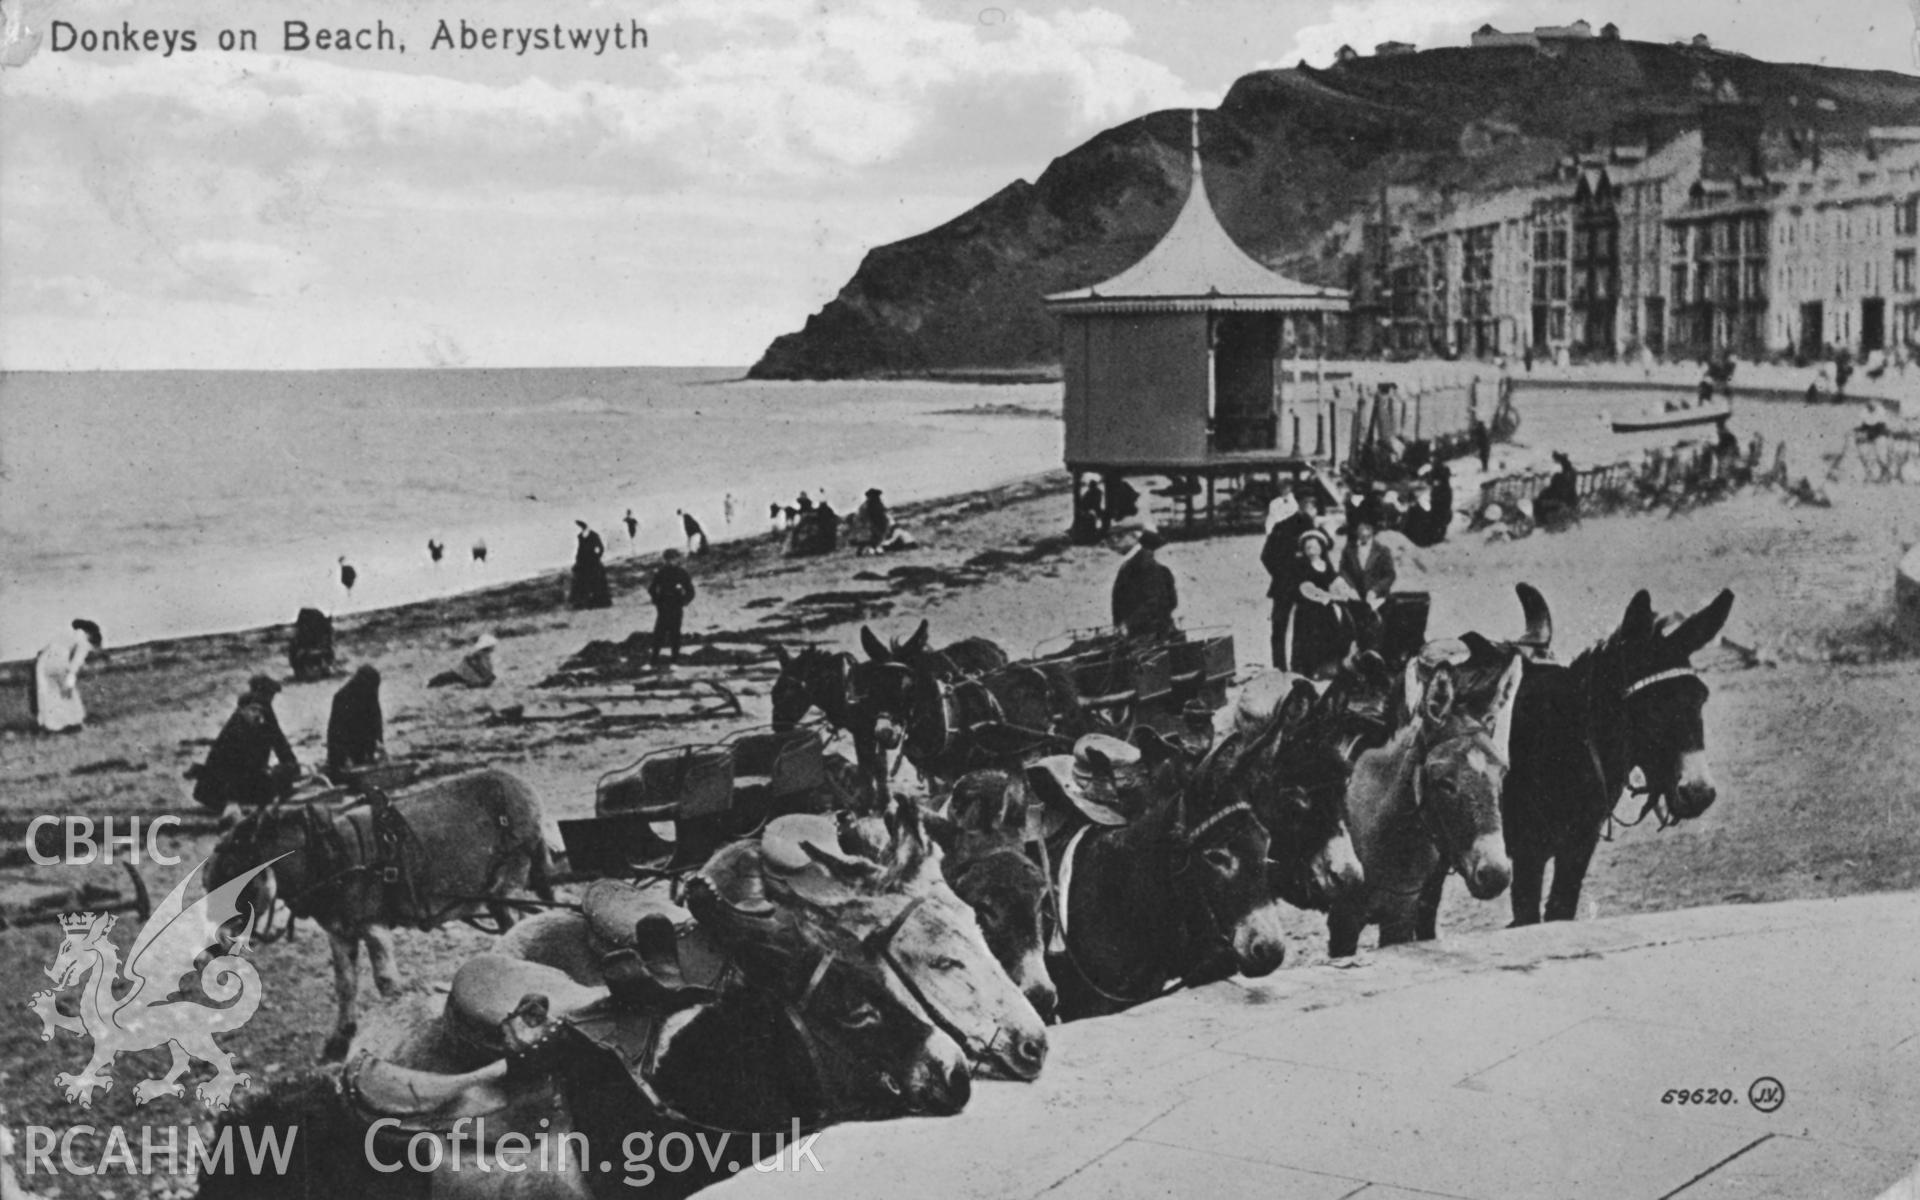 Digital copy of postcard showing Donkeys on Beach, Aberystwyth, dated 1915.  Loaned for copying by Charlie Downes